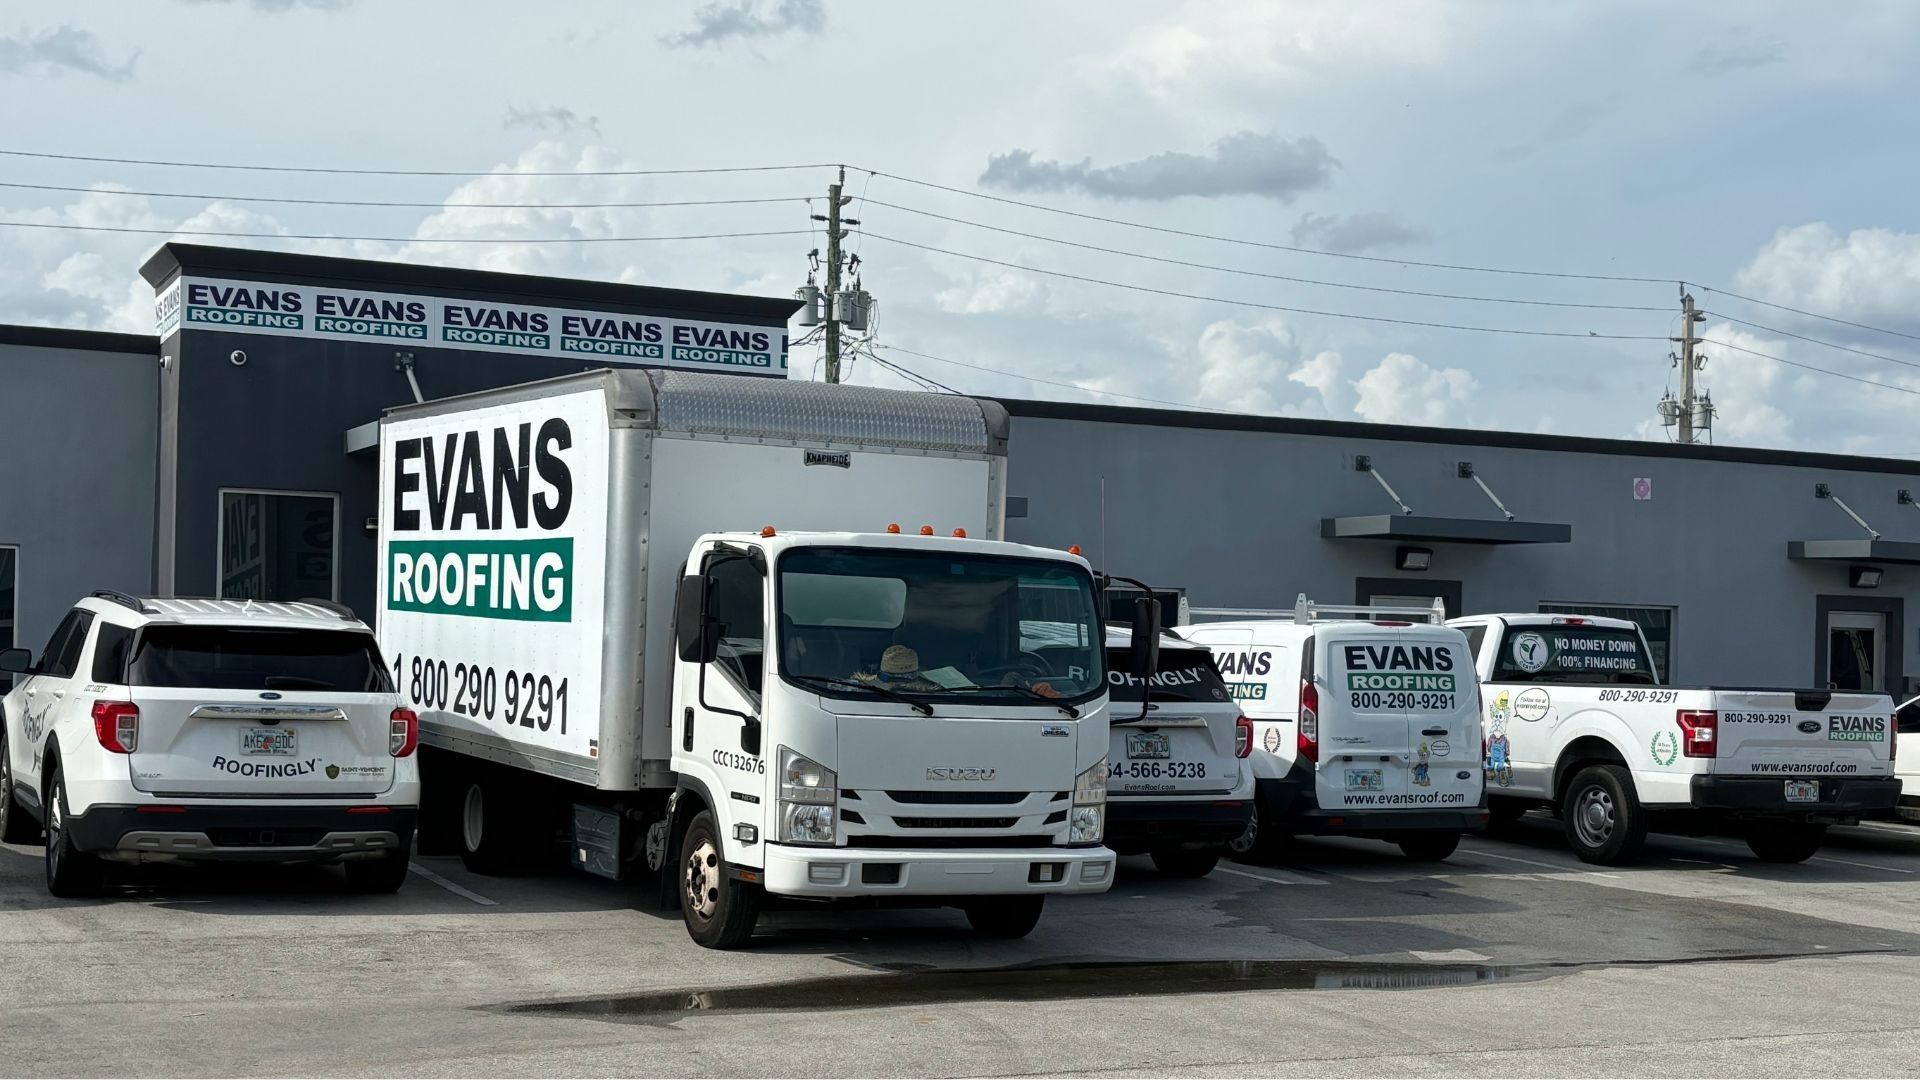 A row of evans roofing trucks are parked in front of a building.